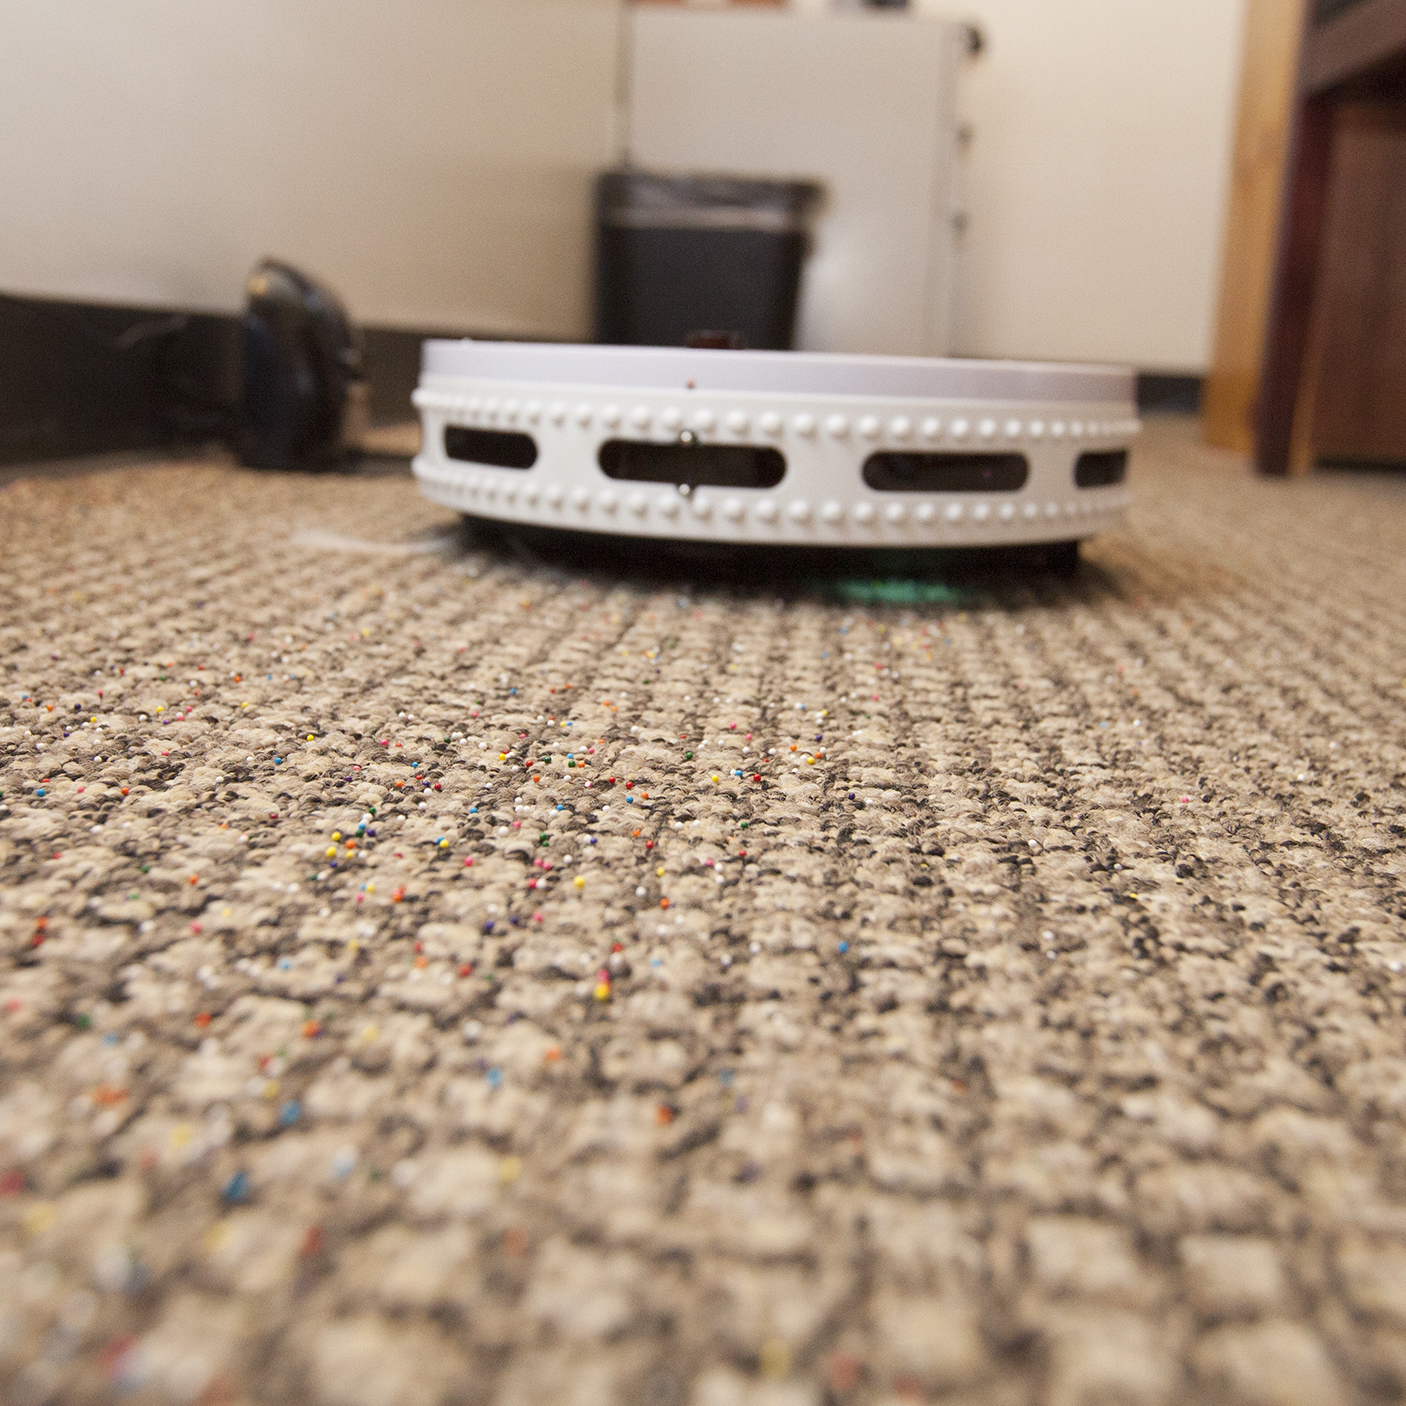 https://res.cloudinary.com/hksqkdlah/image/upload/27924_can-cleaning-robot-vacuums-1654-square.jpg